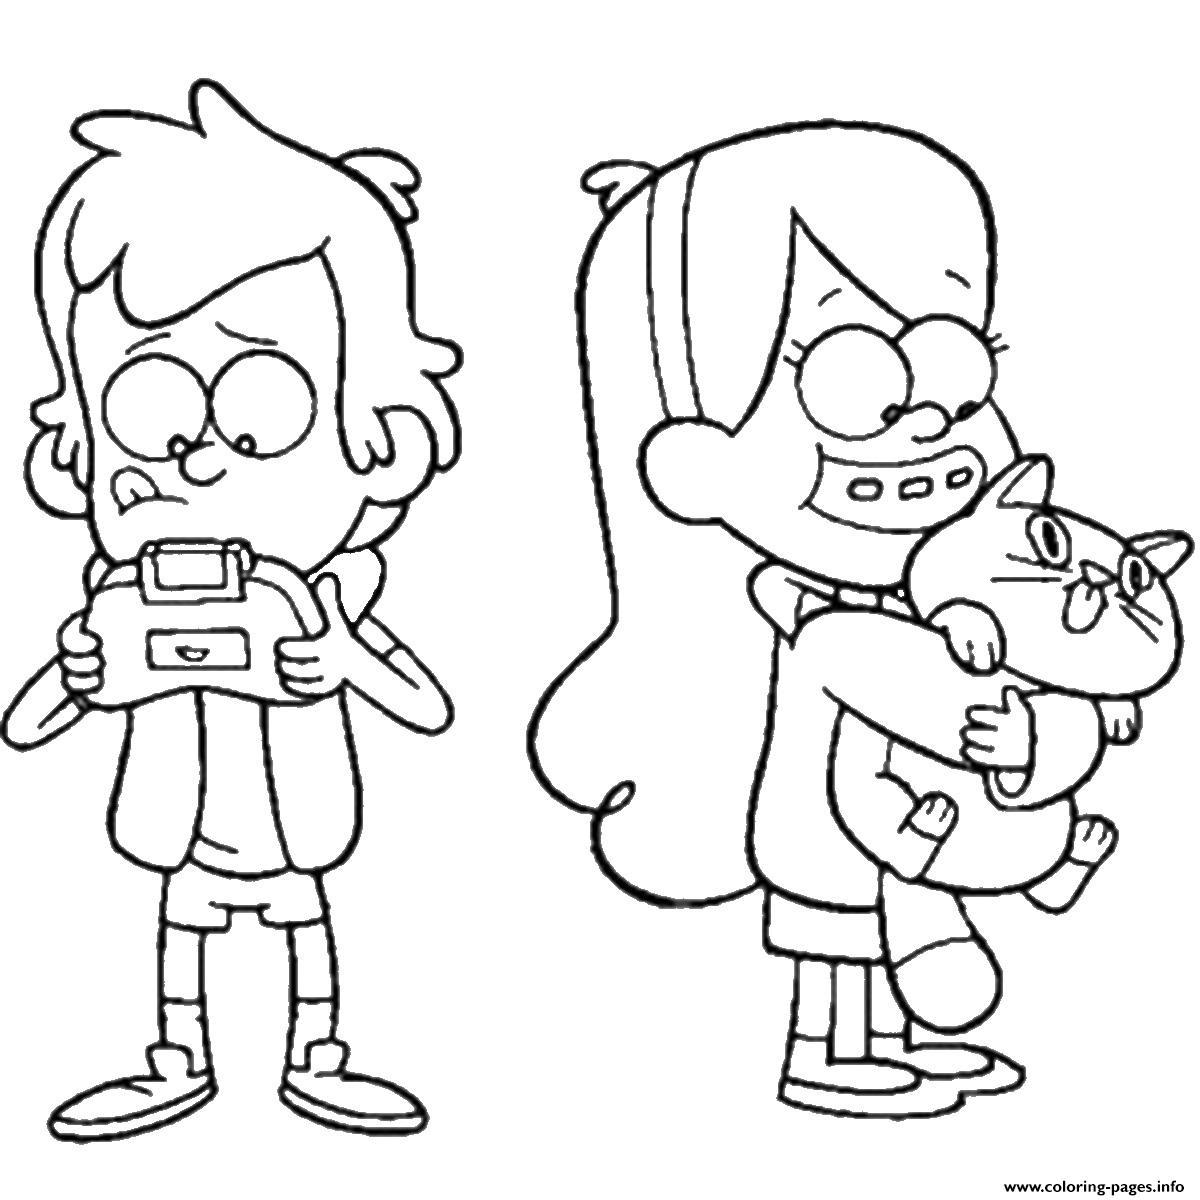 Dipper and Mabel from Gravity Falls Coloring Page